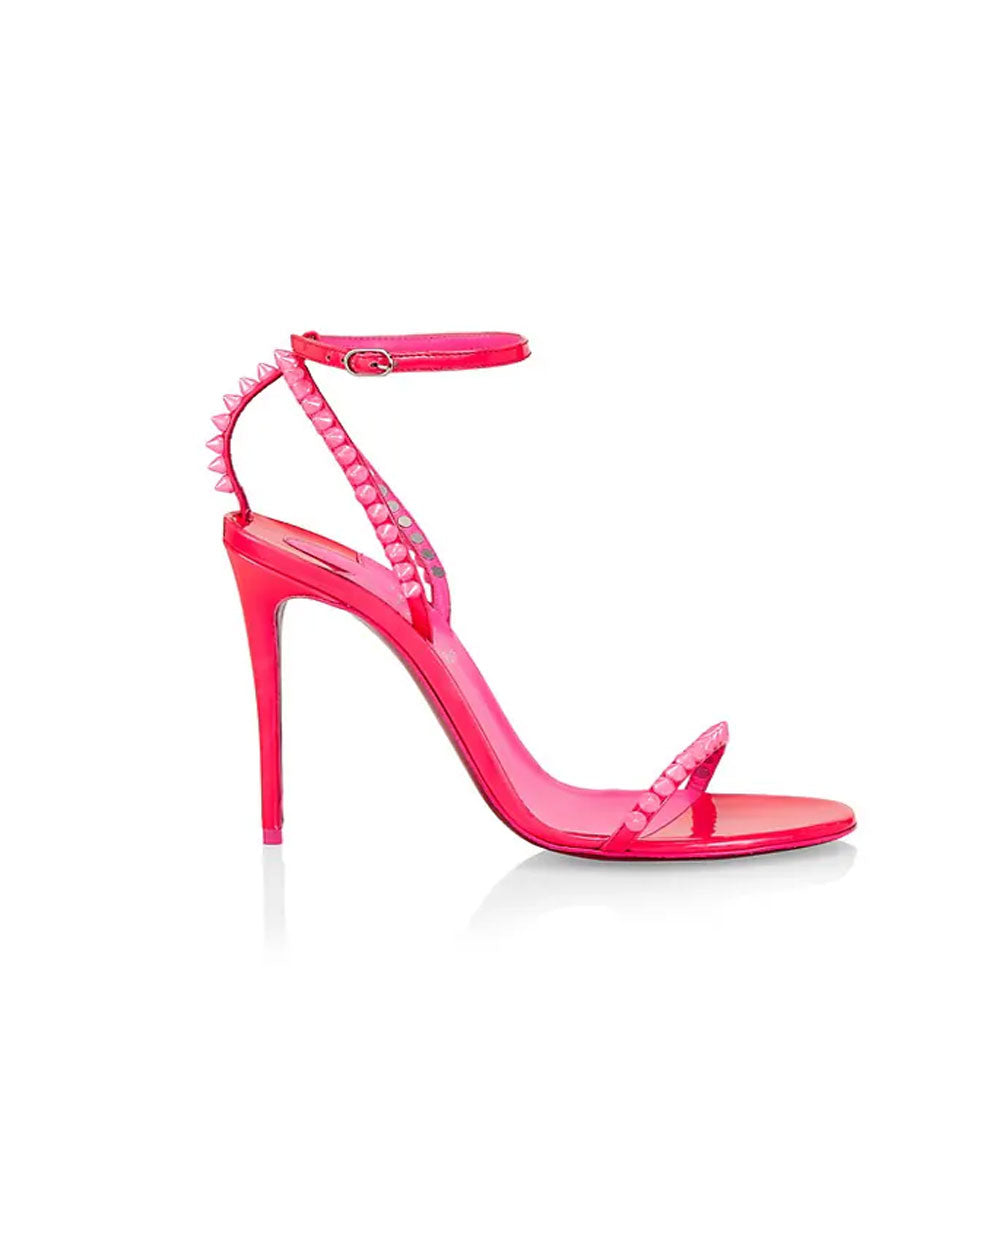 So Me - 100 mm Sandals - Leather - Blush - Christian Louboutin